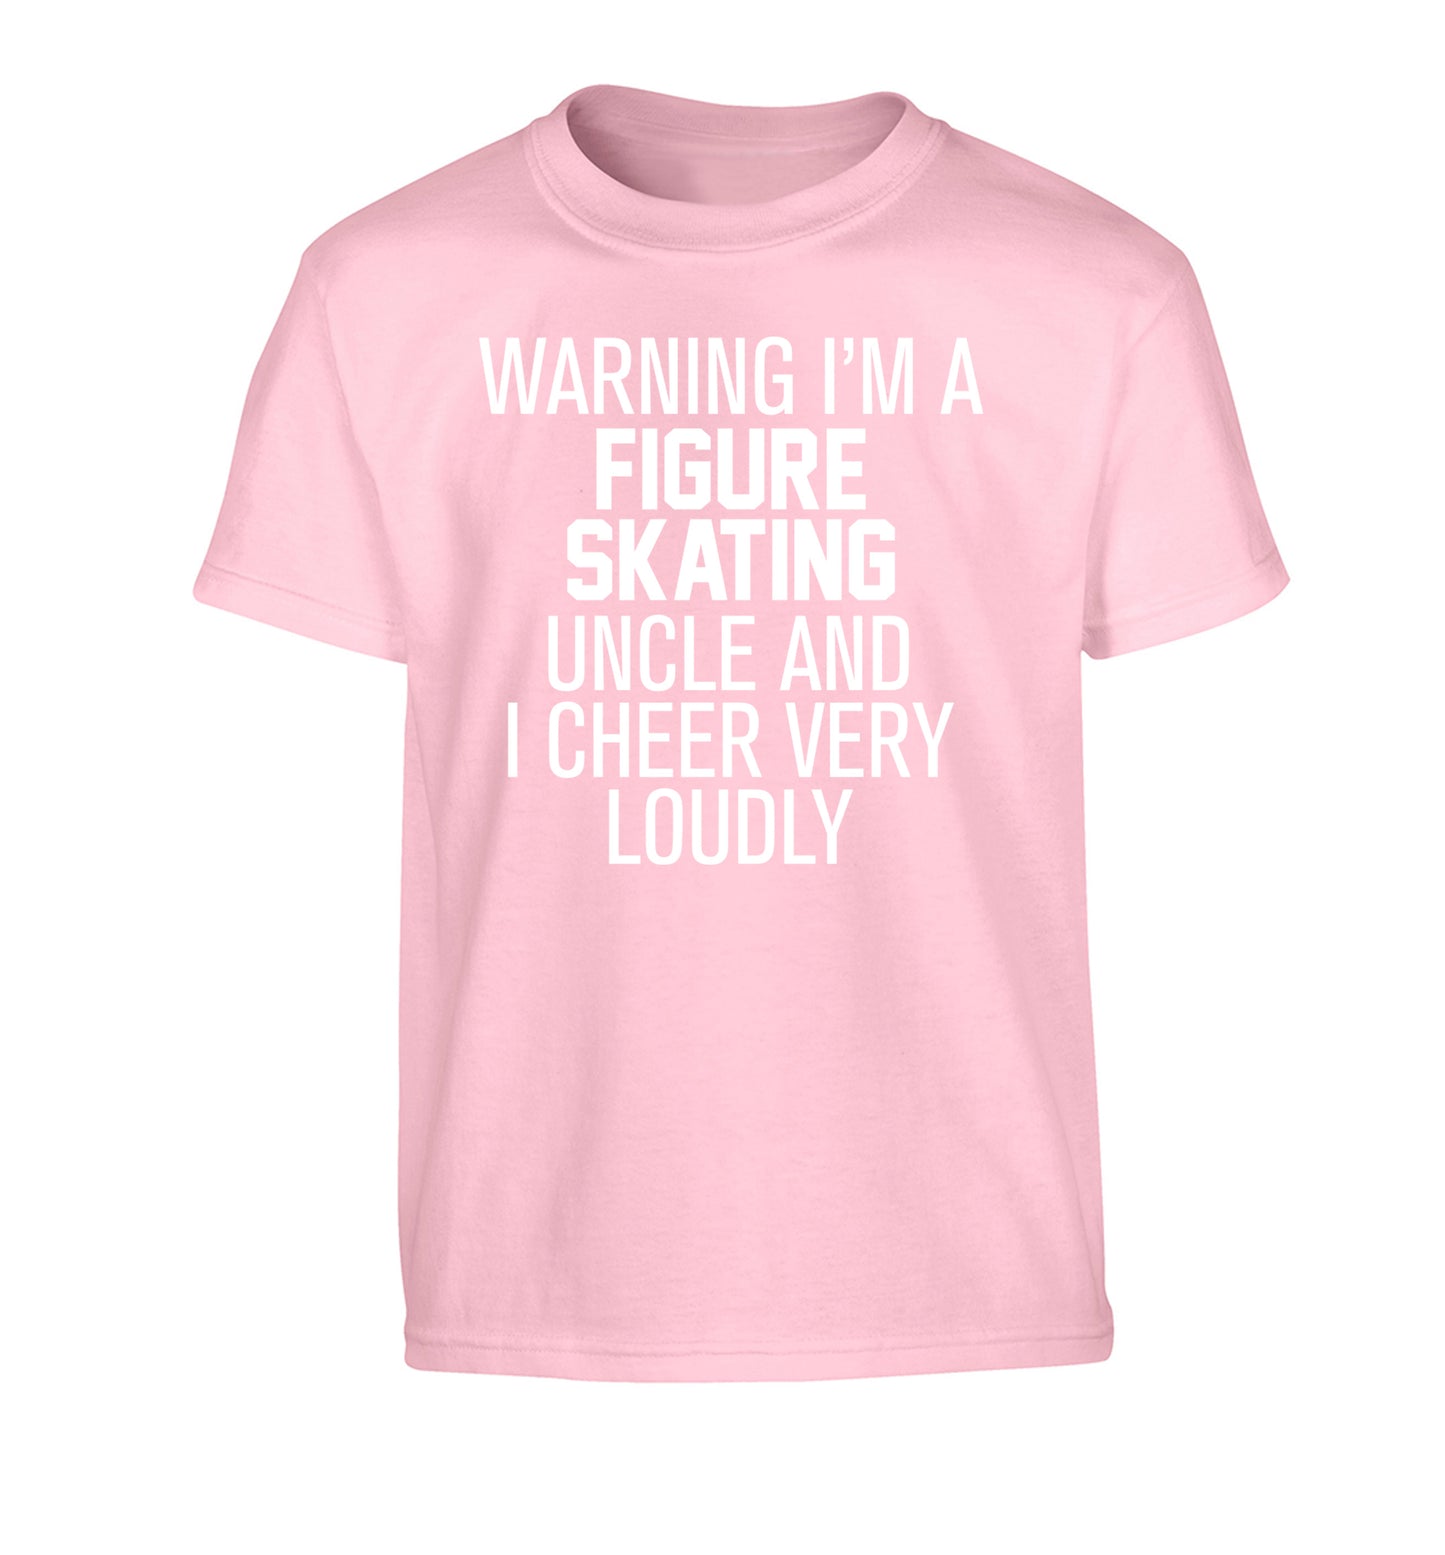 Warning I'm a figure skating uncle and I cheer very loudly Children's light pink Tshirt 12-14 Years